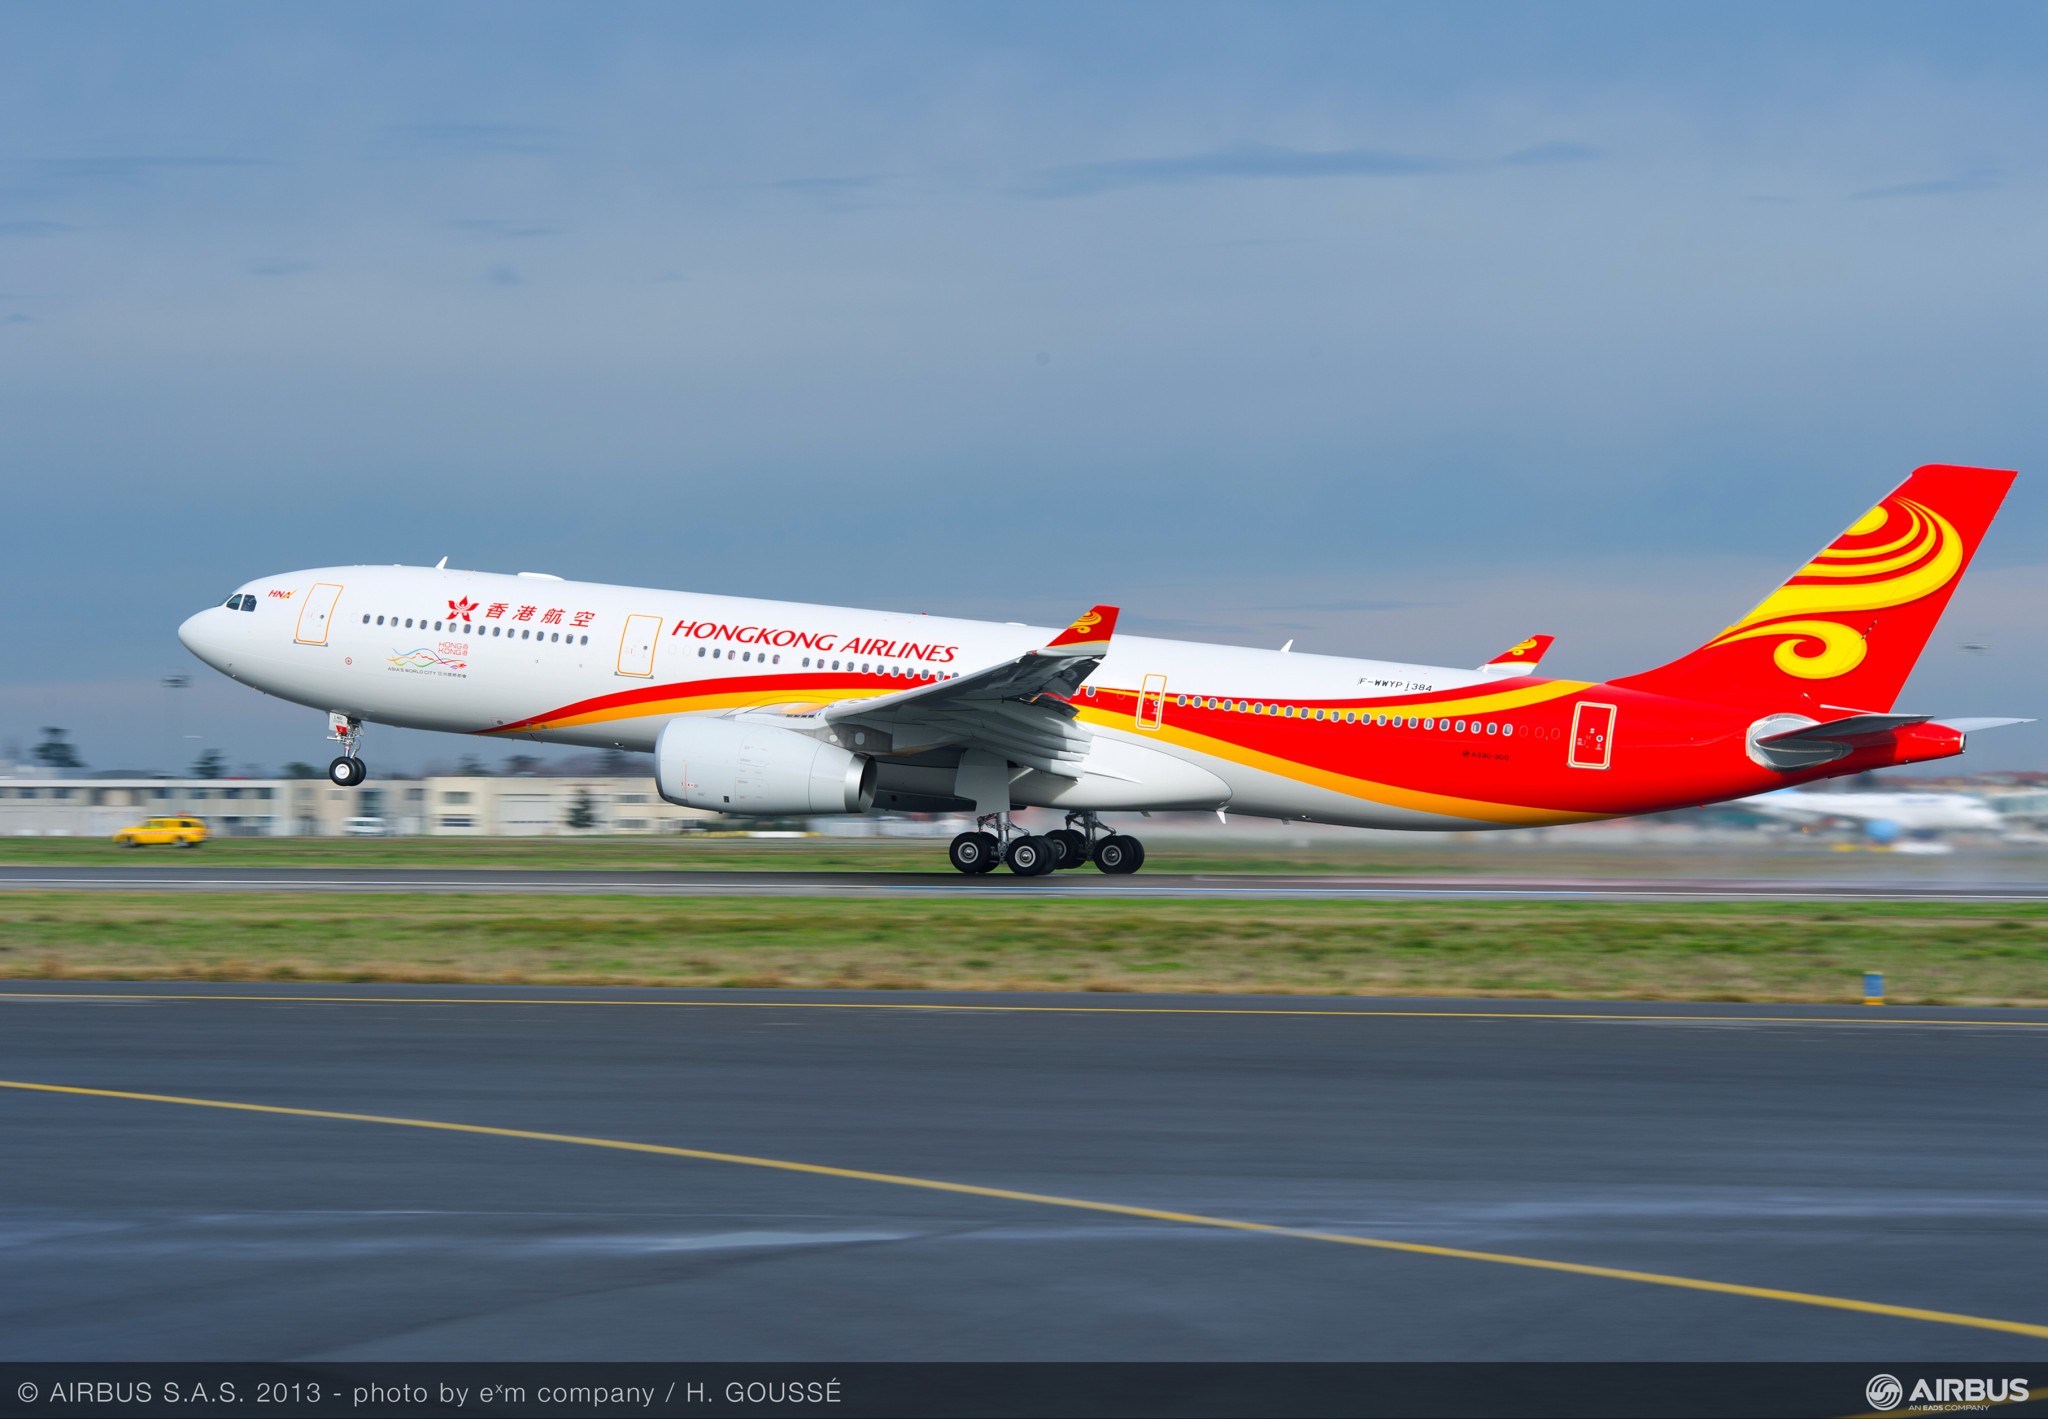 Hong Kong Airlines joins the Sabre Airline Solutions global customer community